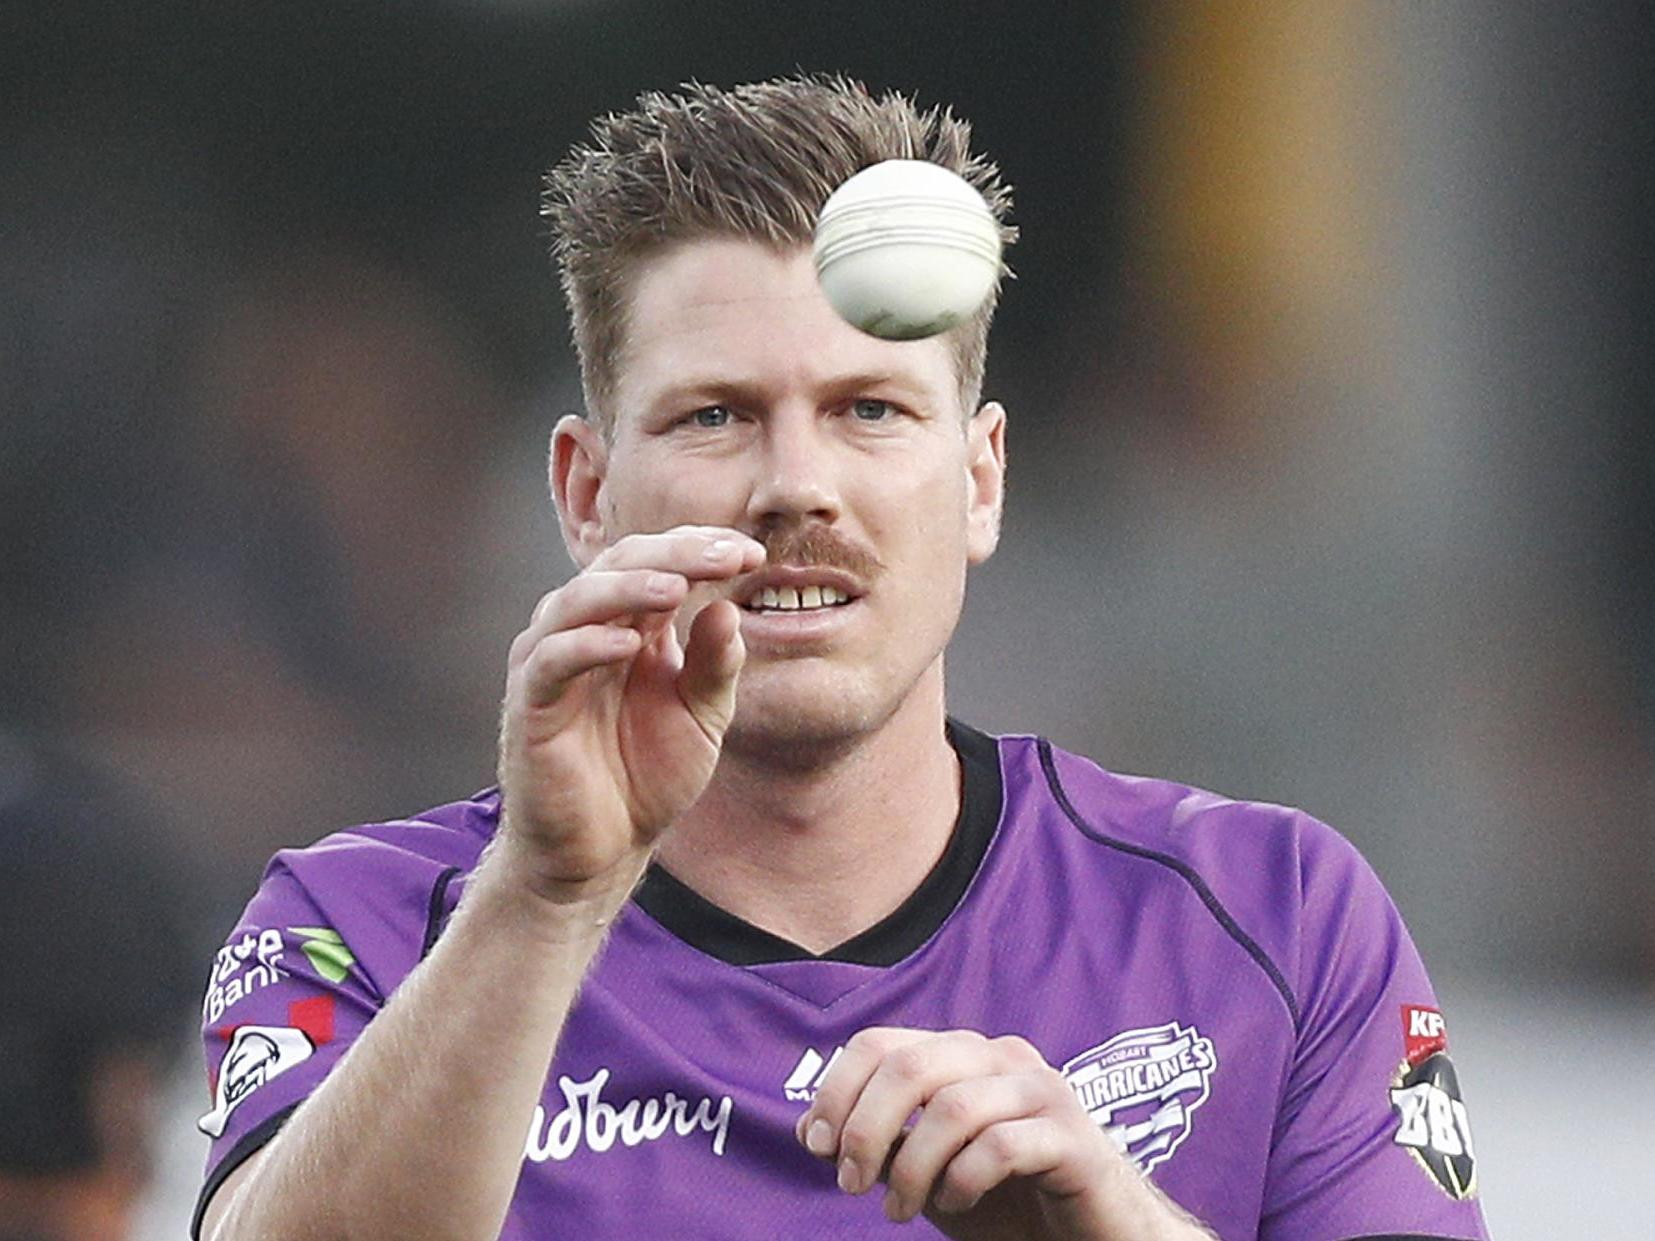 James Faulkner has thanked the LGBT community for their support